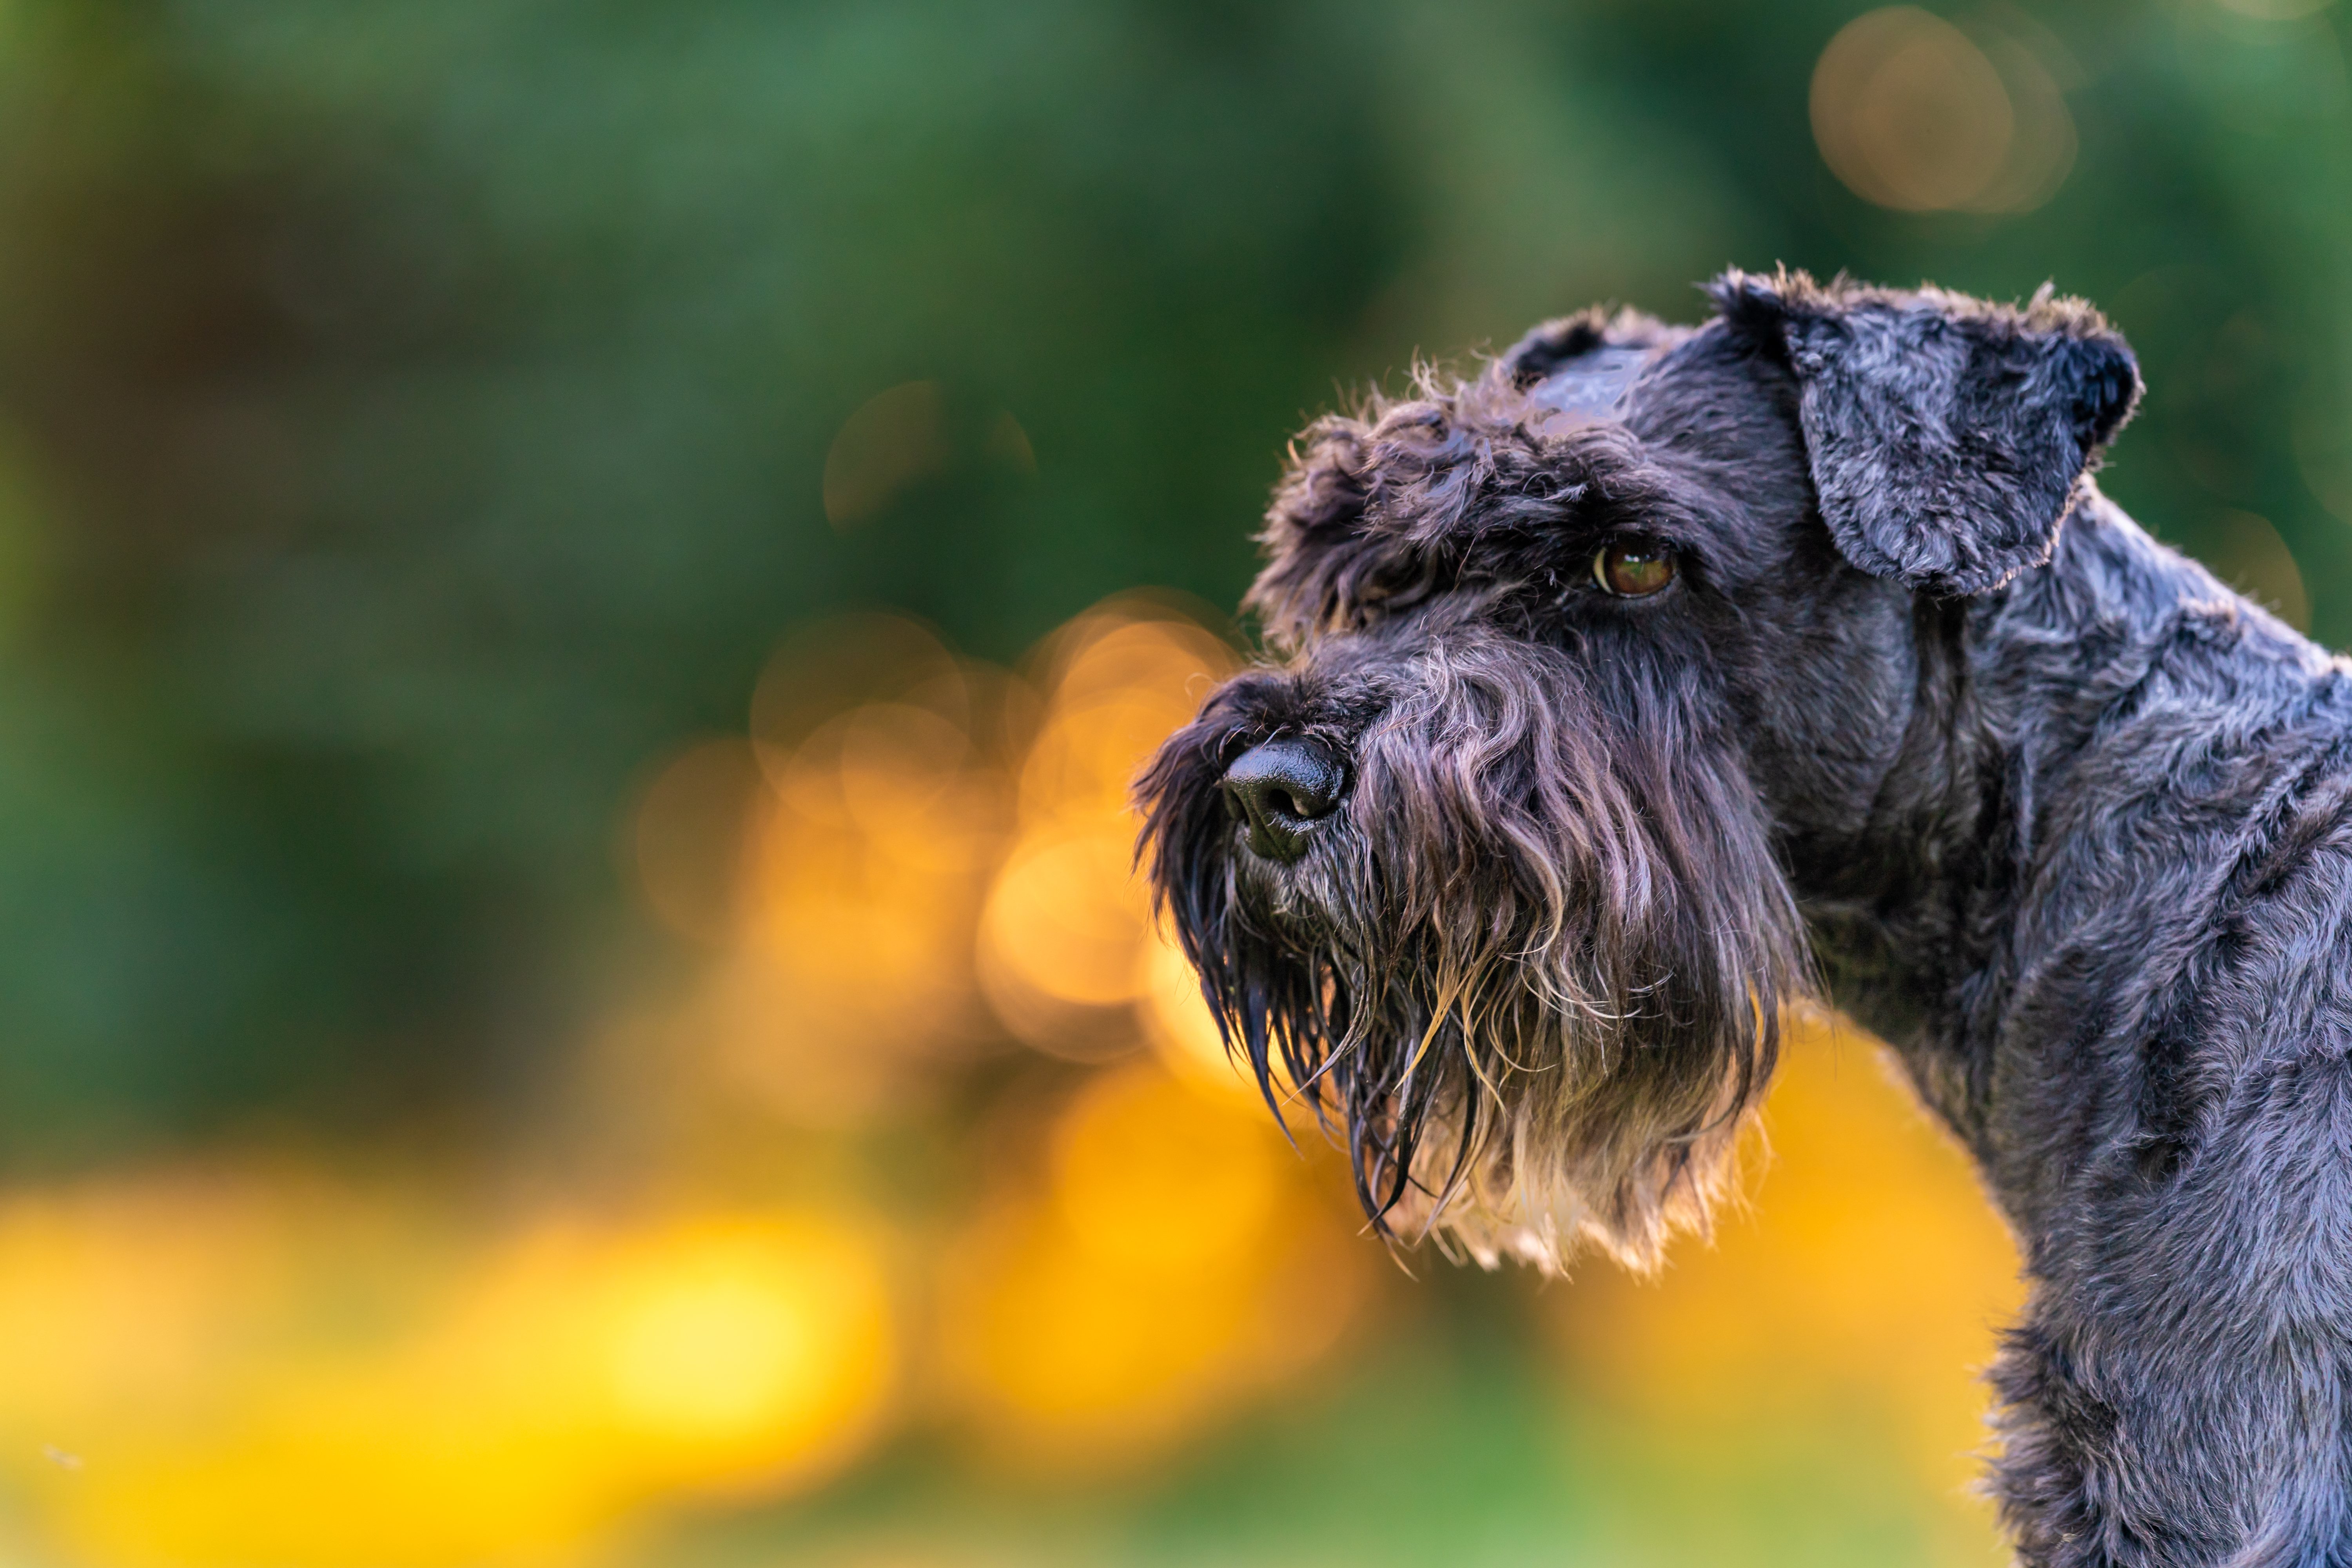 A rough coat is typical for Schnauzers.